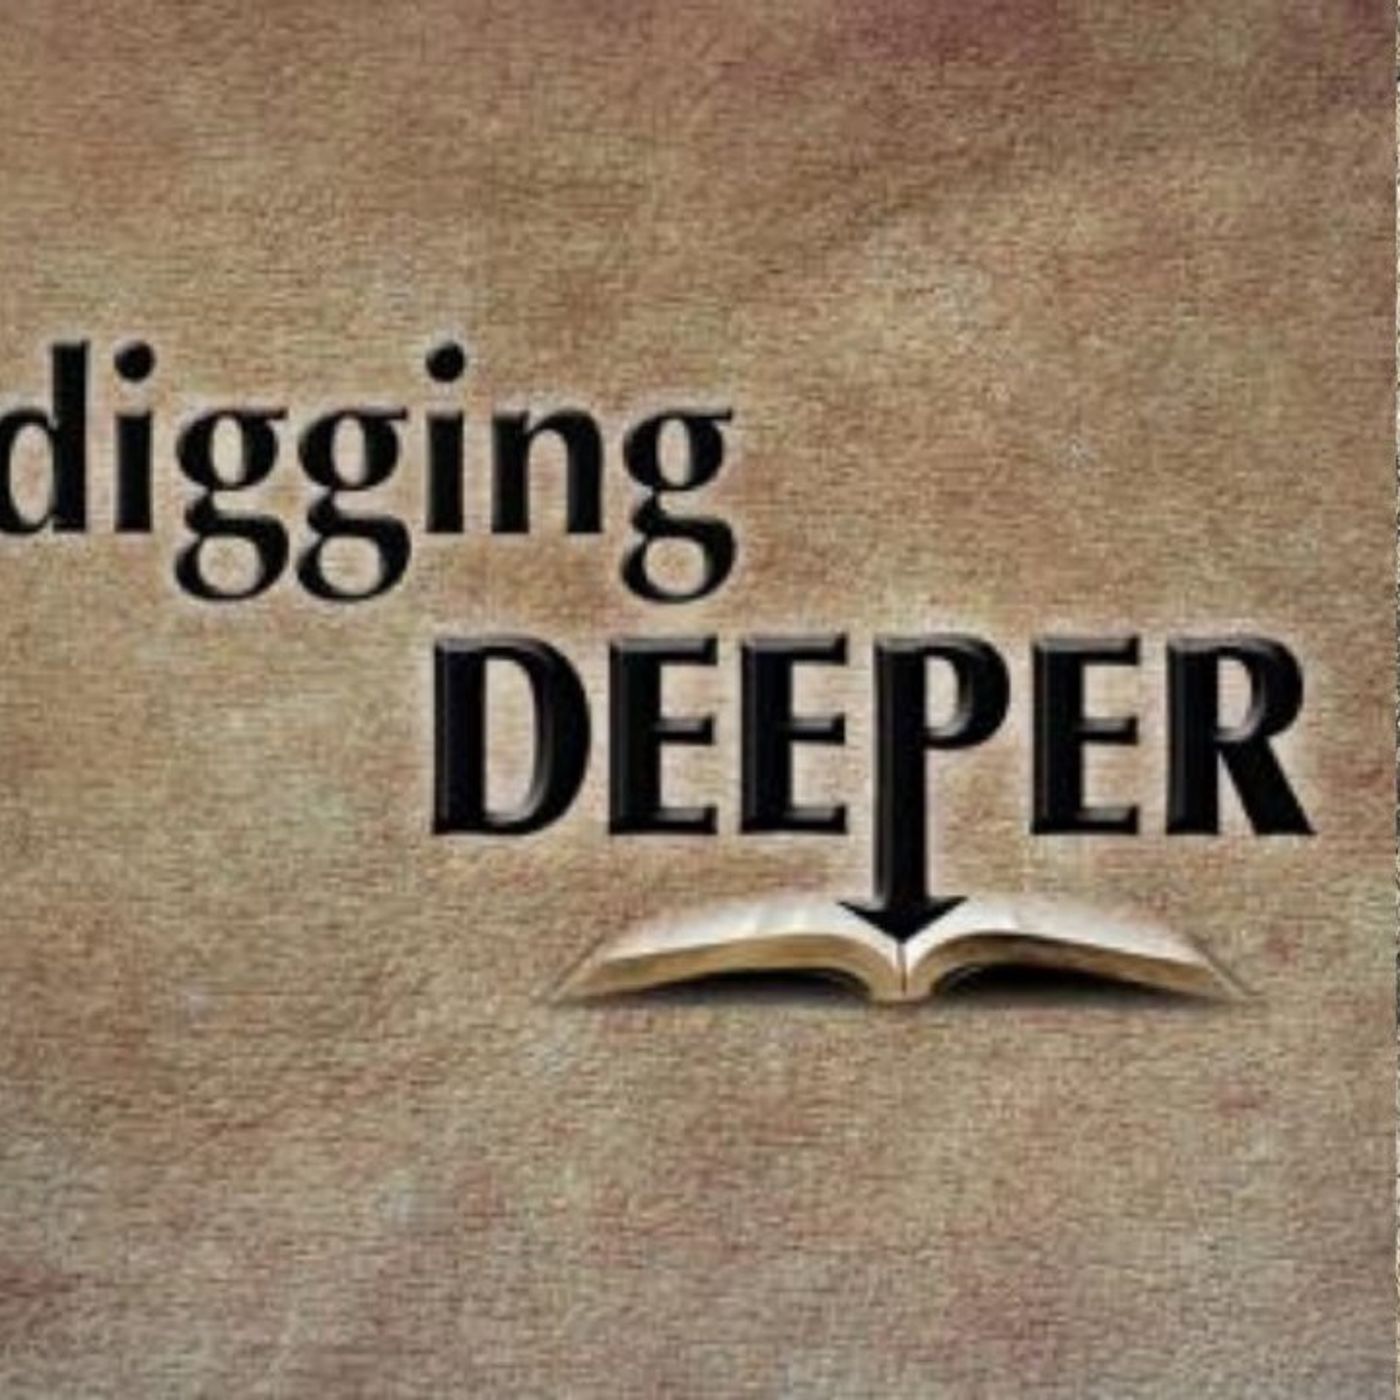 Digging Deeper - What’s the Backstory?